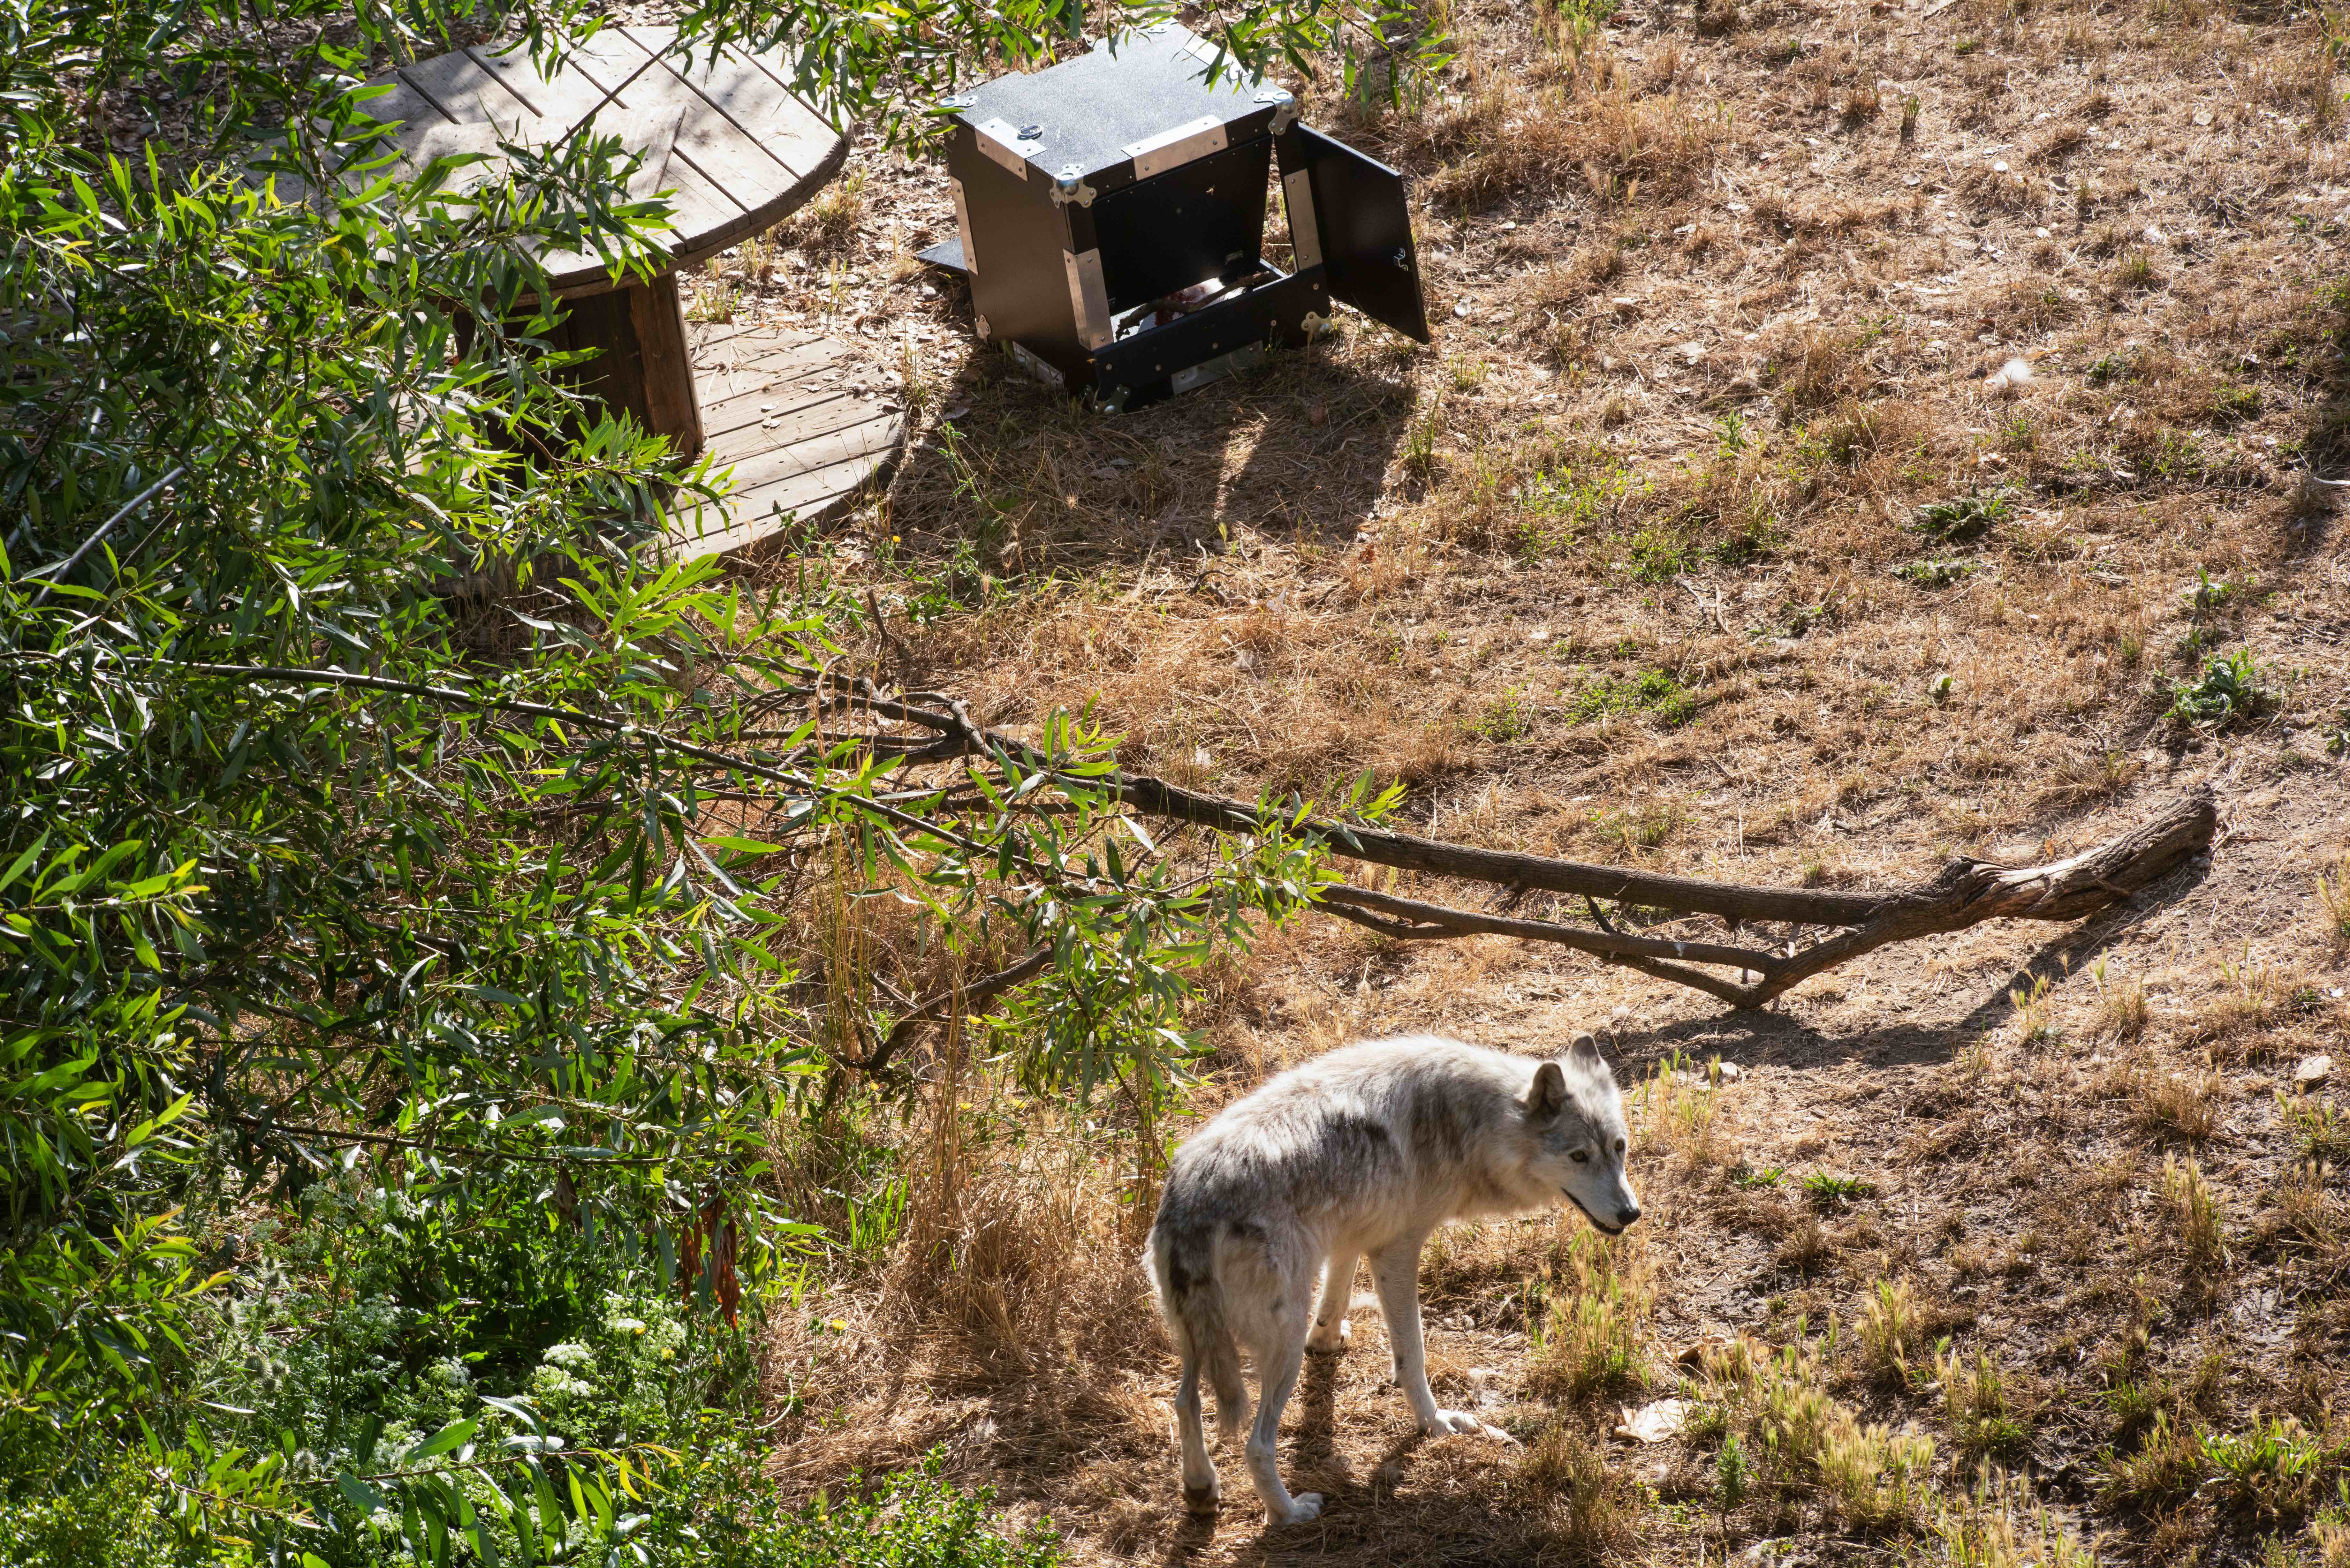 A gray wolf near one of seven puzzle boxes placed in its habitat at the Oakland Zoo.   Photo by Gregory Urquiaga / UC Davis